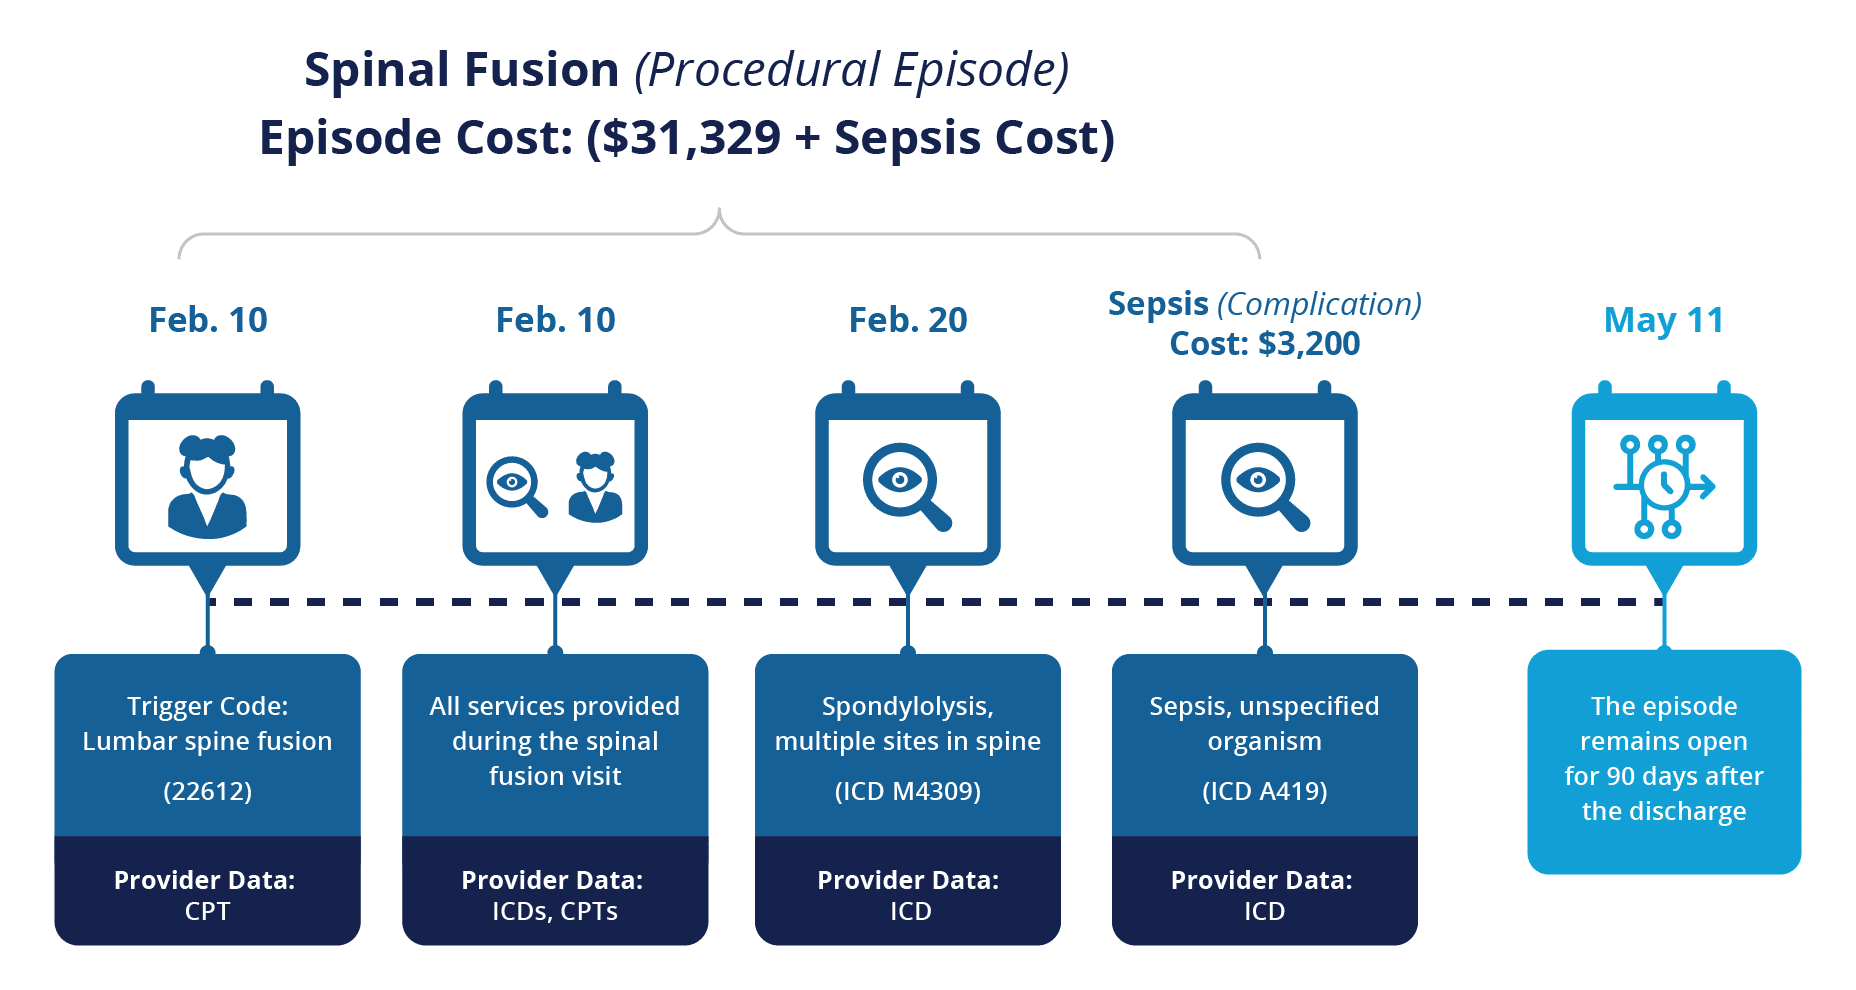 Spinal Fusion (Procedural Episode) Episode Cost: ($31,329 + Sepsis Cost)